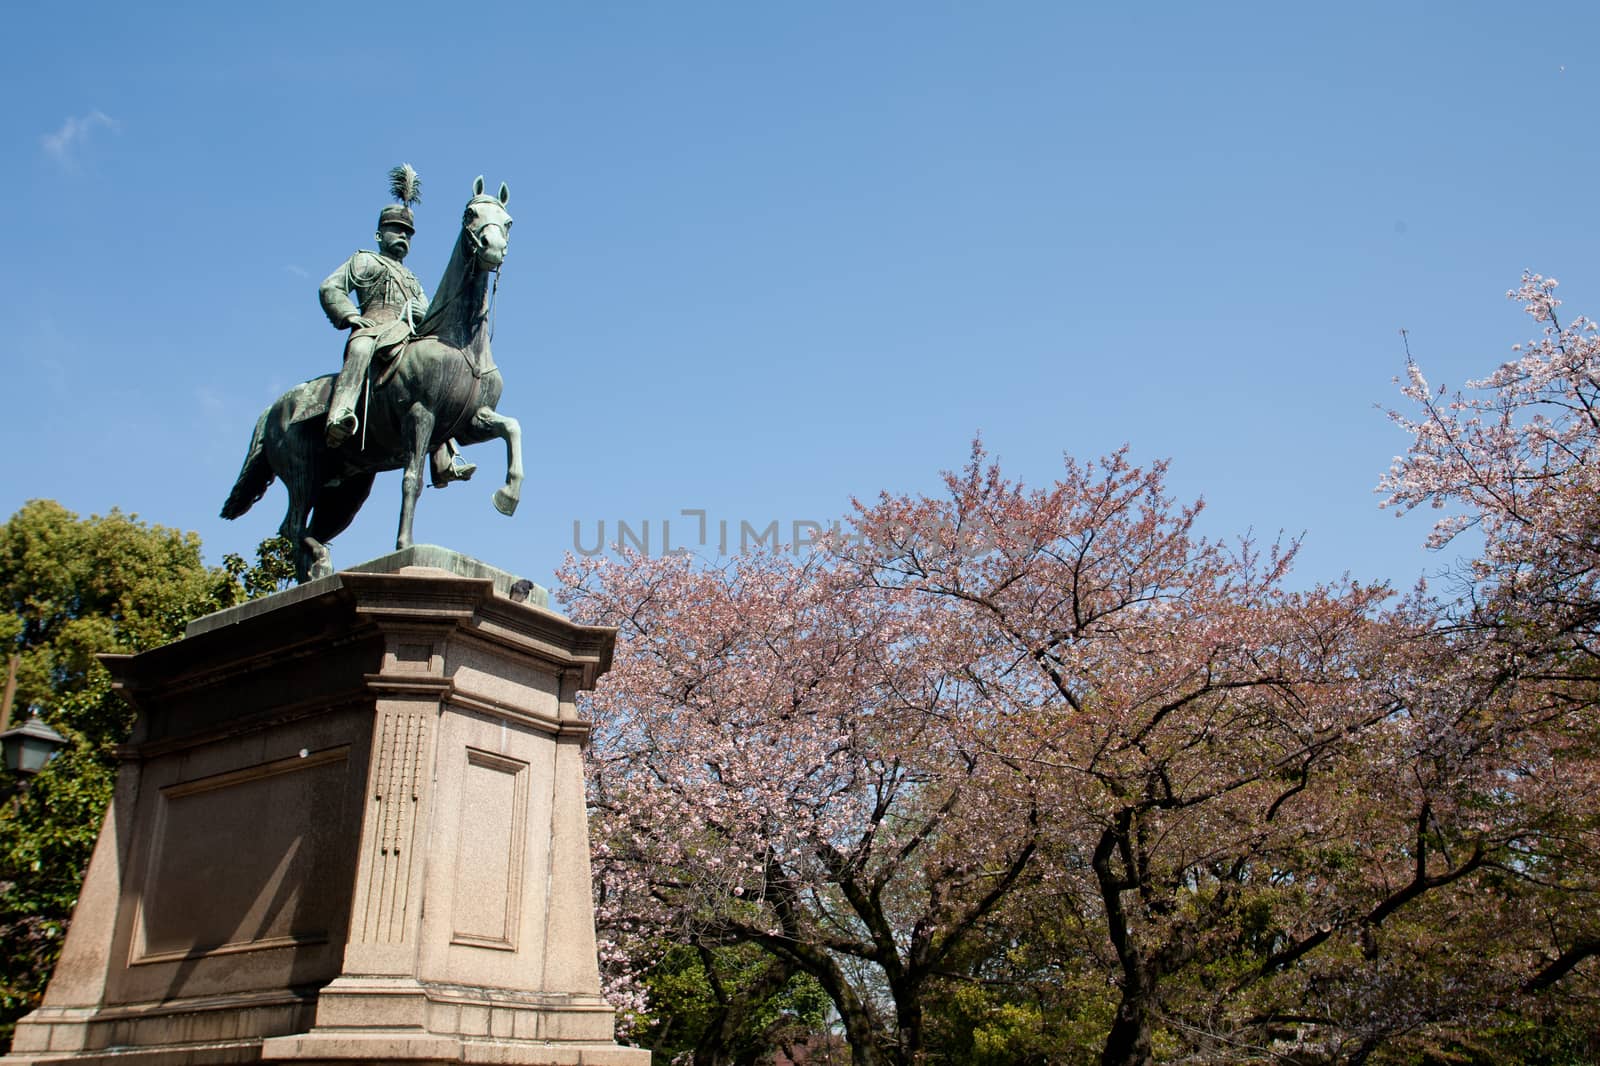 Statue of warrior on horse in Ueno, Tokyo by 2nix